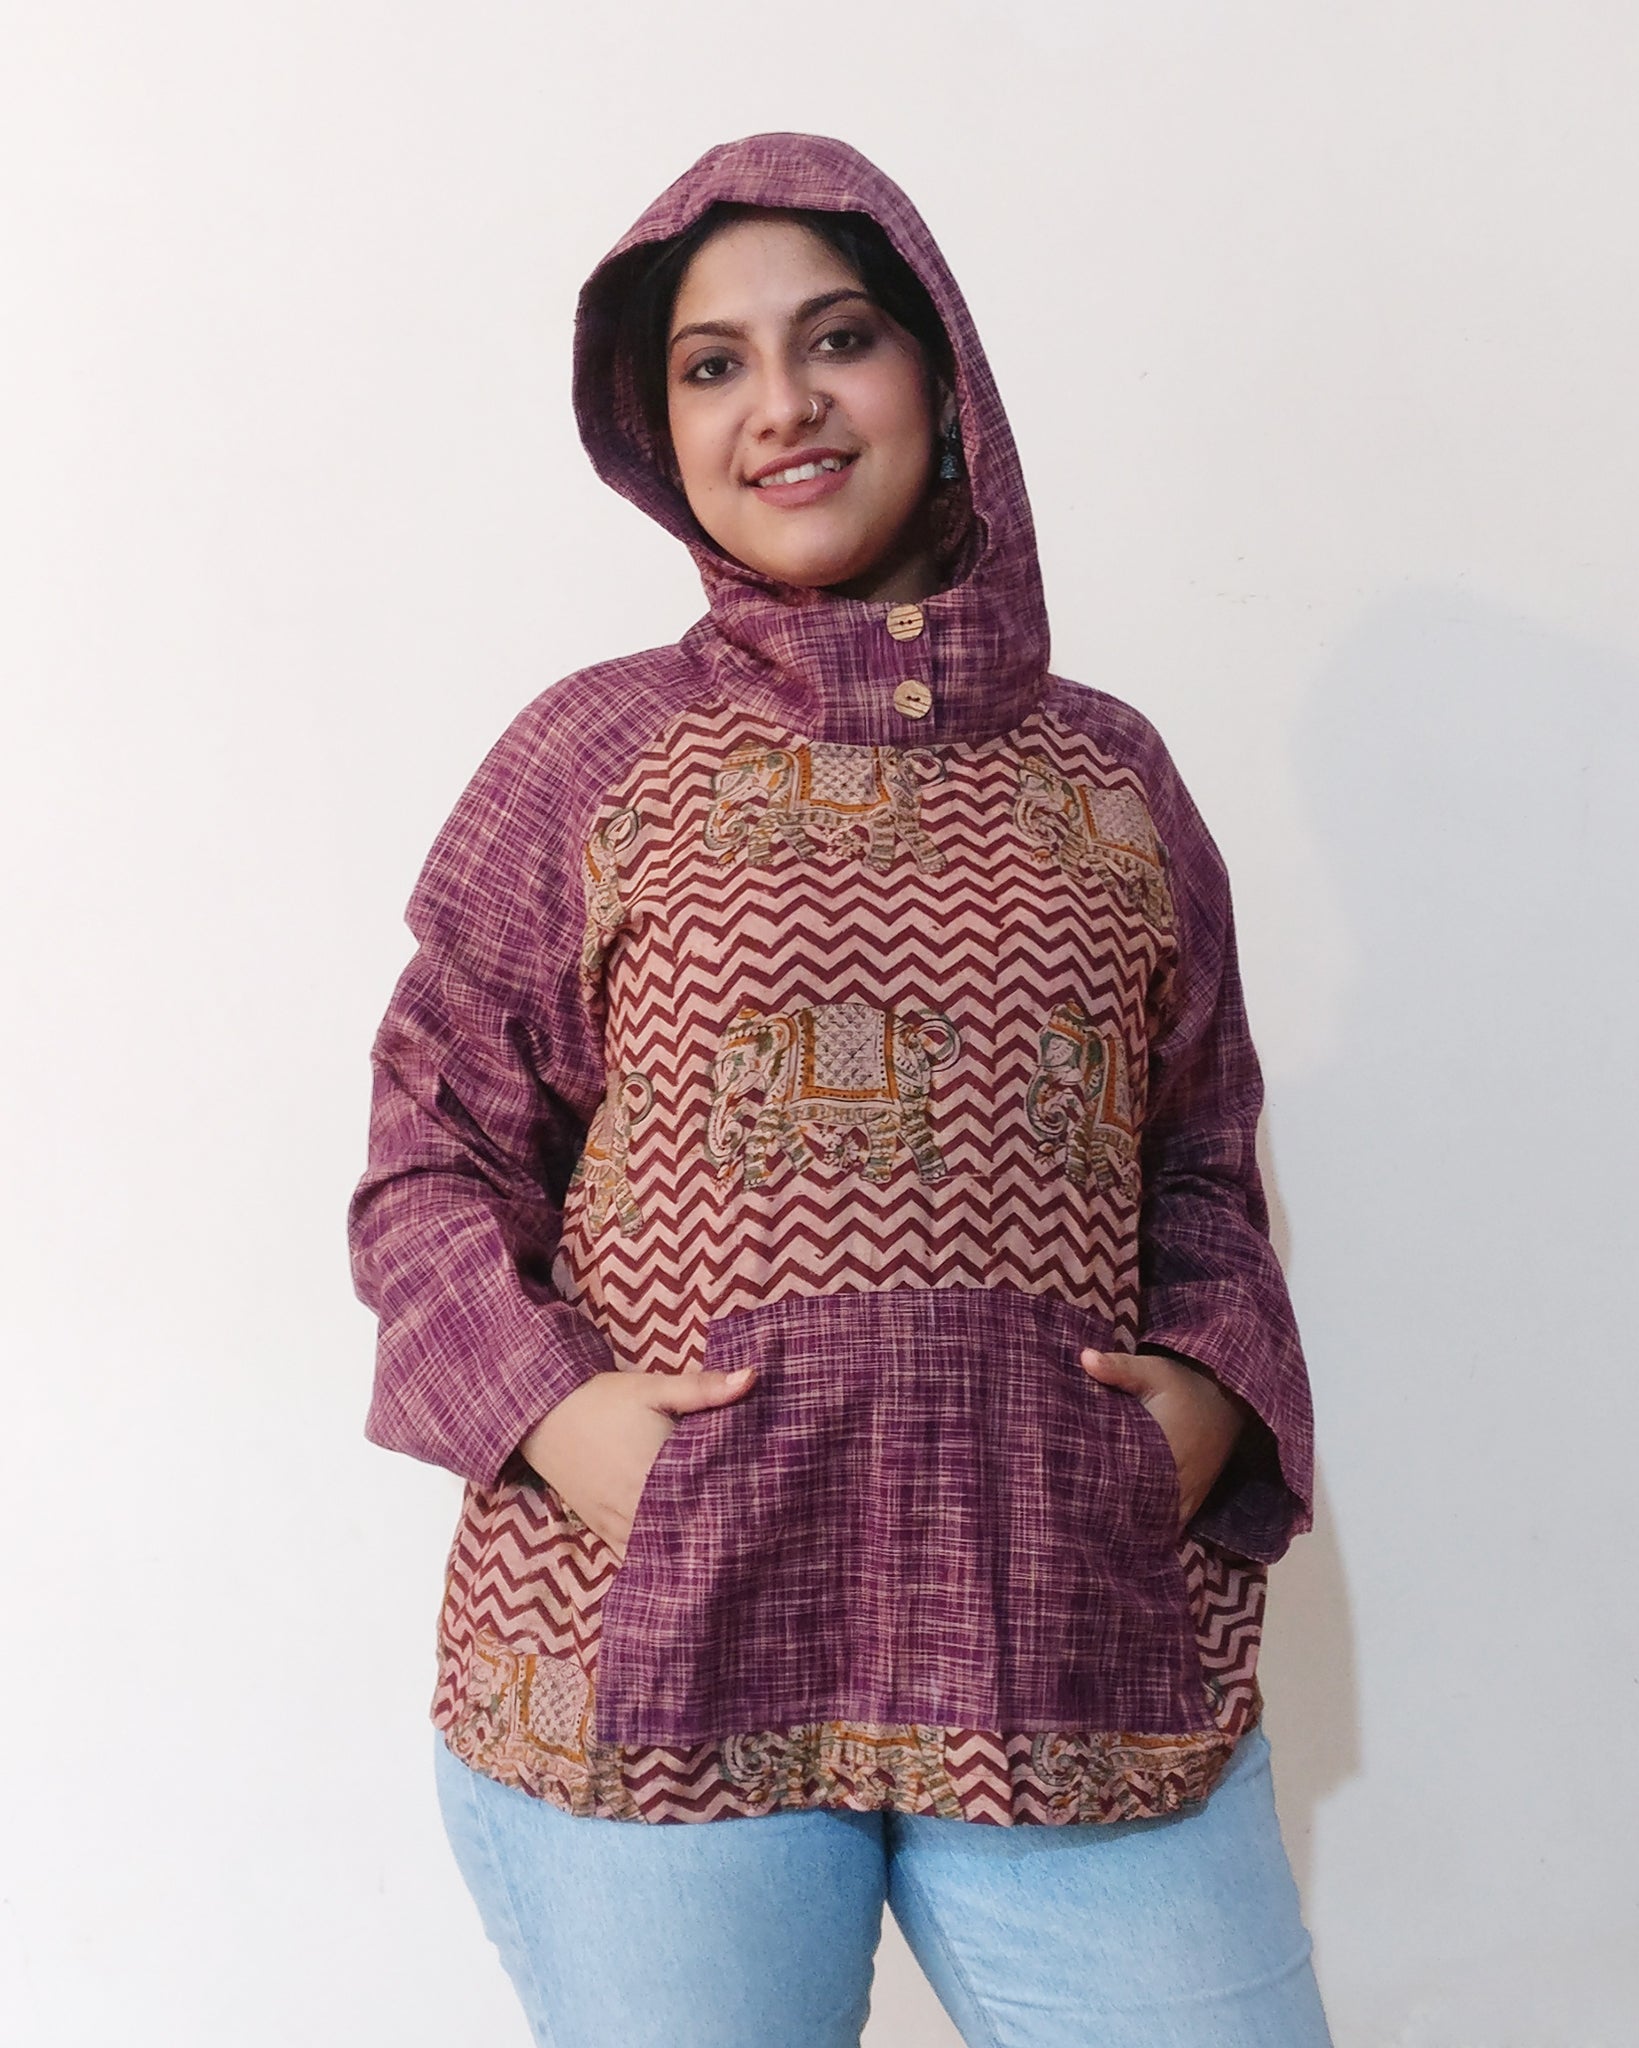 Khadi, cool elephant print... This is a cool Desi hoodie. Comfortable breezy thin cotton. Shop online! (with hood on)